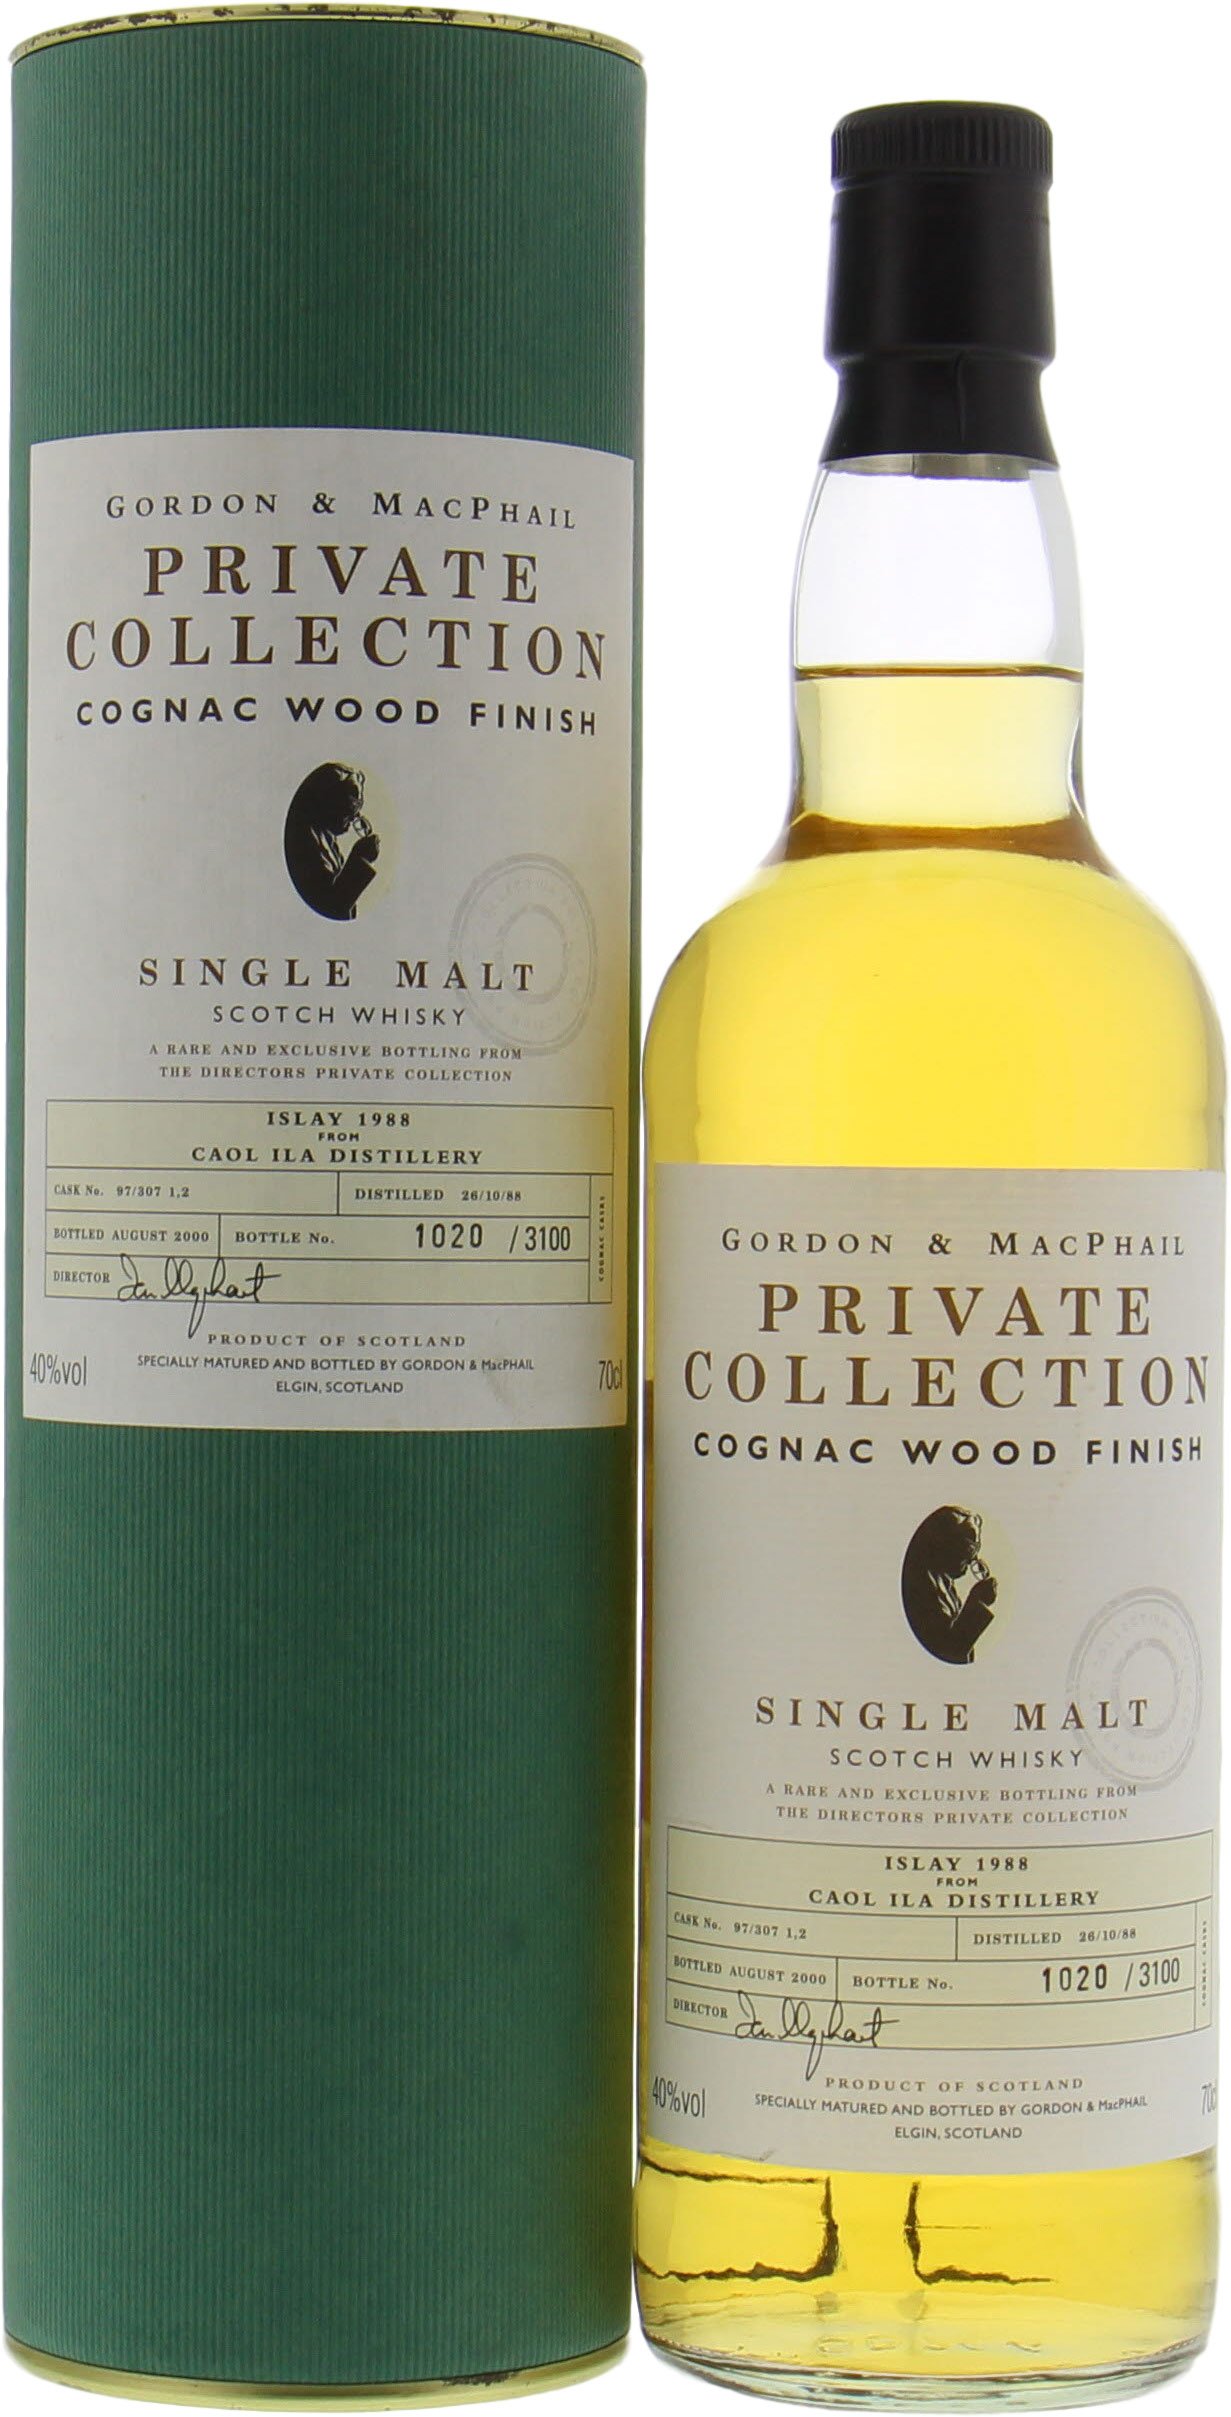 Caol Ila - 12 Years Old Gordon & MacPhail Private Collection Cask 97/307 1,2 40% 1988 Perfect